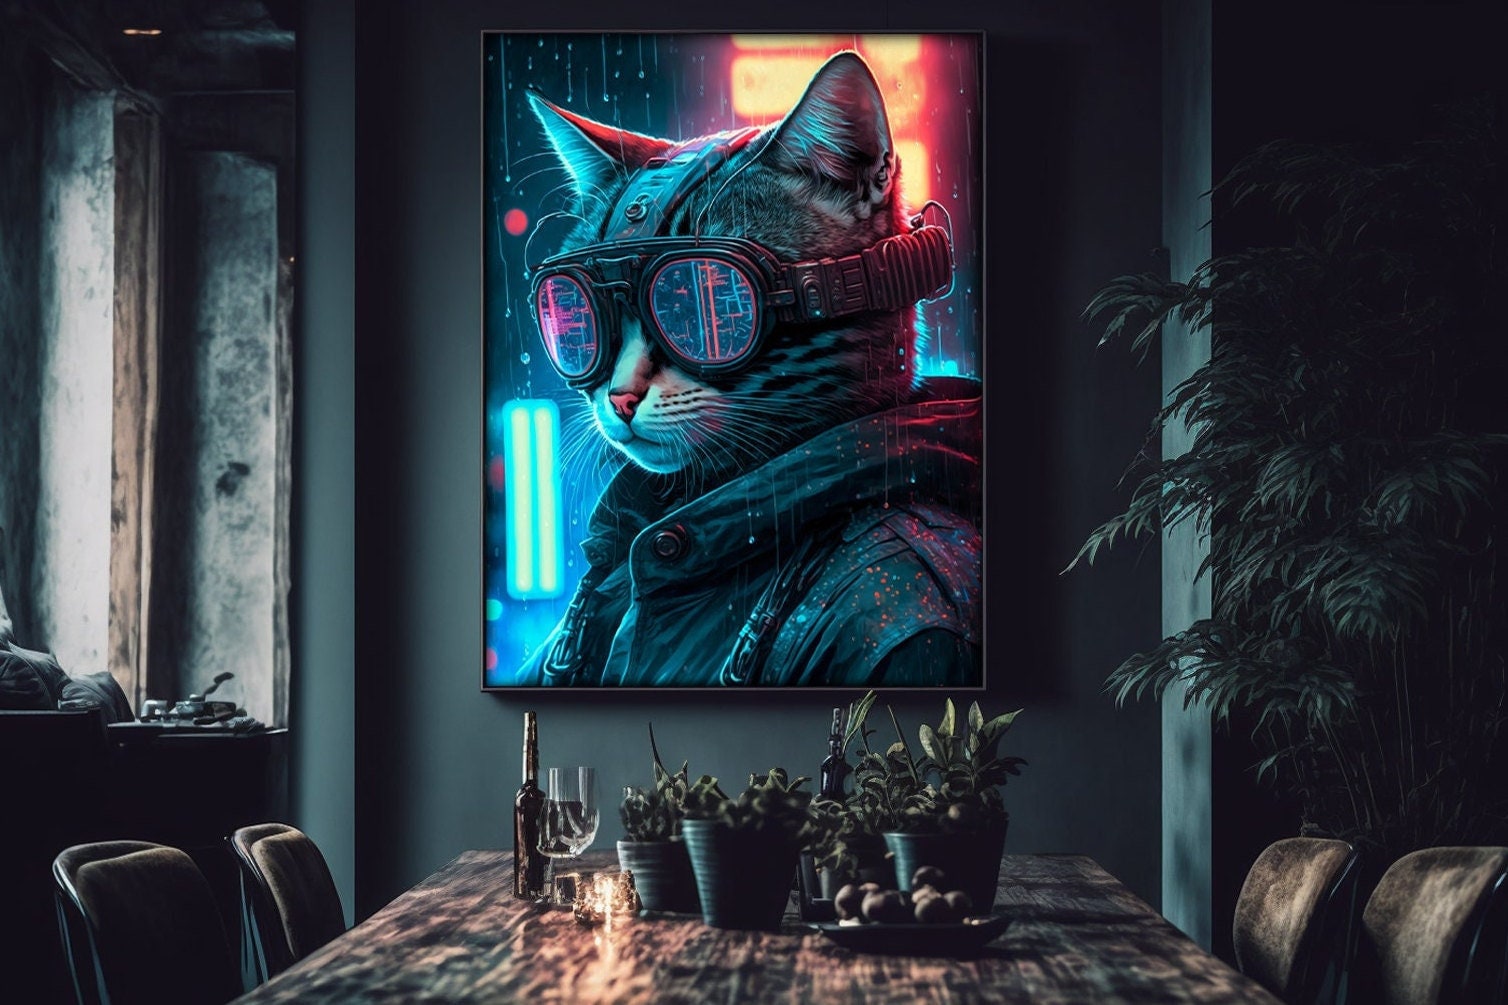 Anime Cyberpunk Edgerunners Posters Mural Kraft Paper Retro Art Painting  Pictures Vintage Home Decor Aesthetic Room Decoration - AliExpress